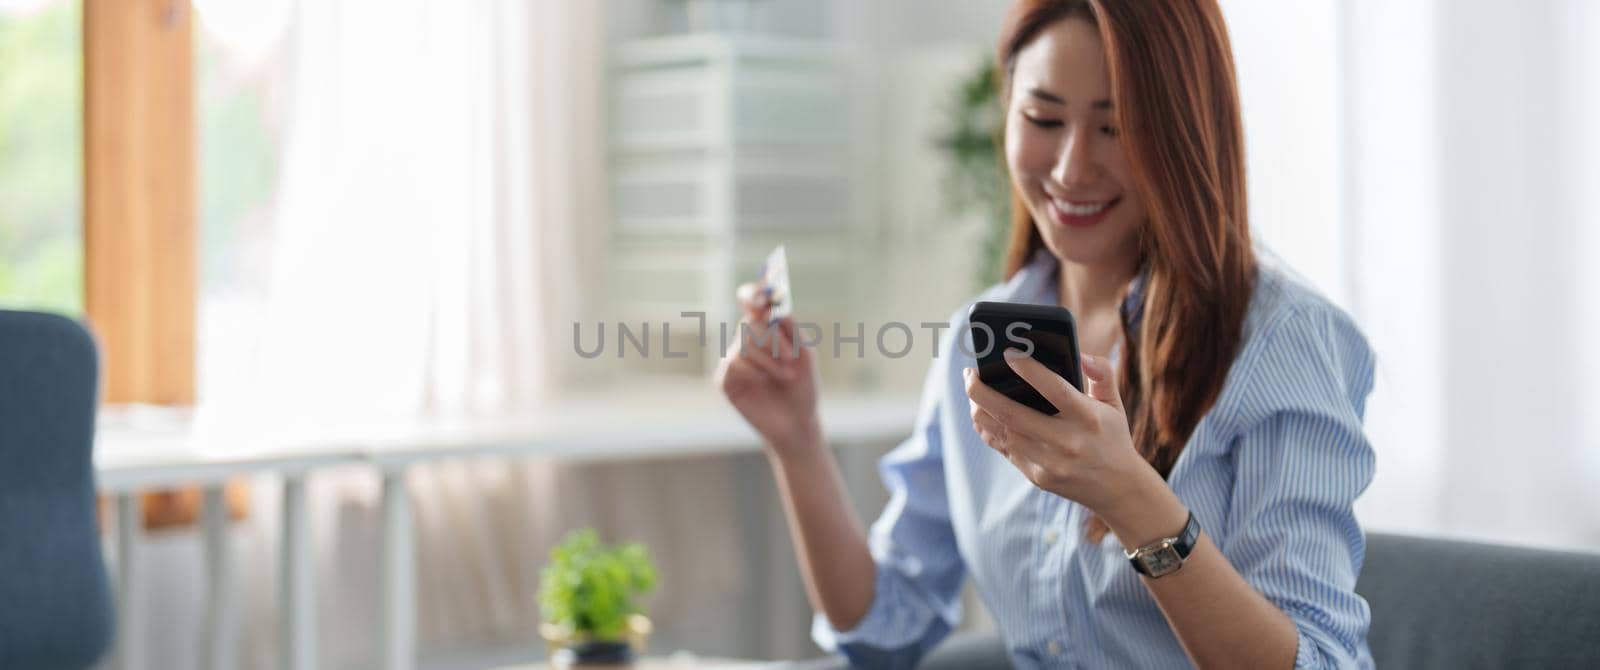 Young beautiful Asian woman using smartphone and credit card for online shopping at home with copy space. E-payment technology, shopaholic lifestyle, or mobile phone financial application concept by nateemee